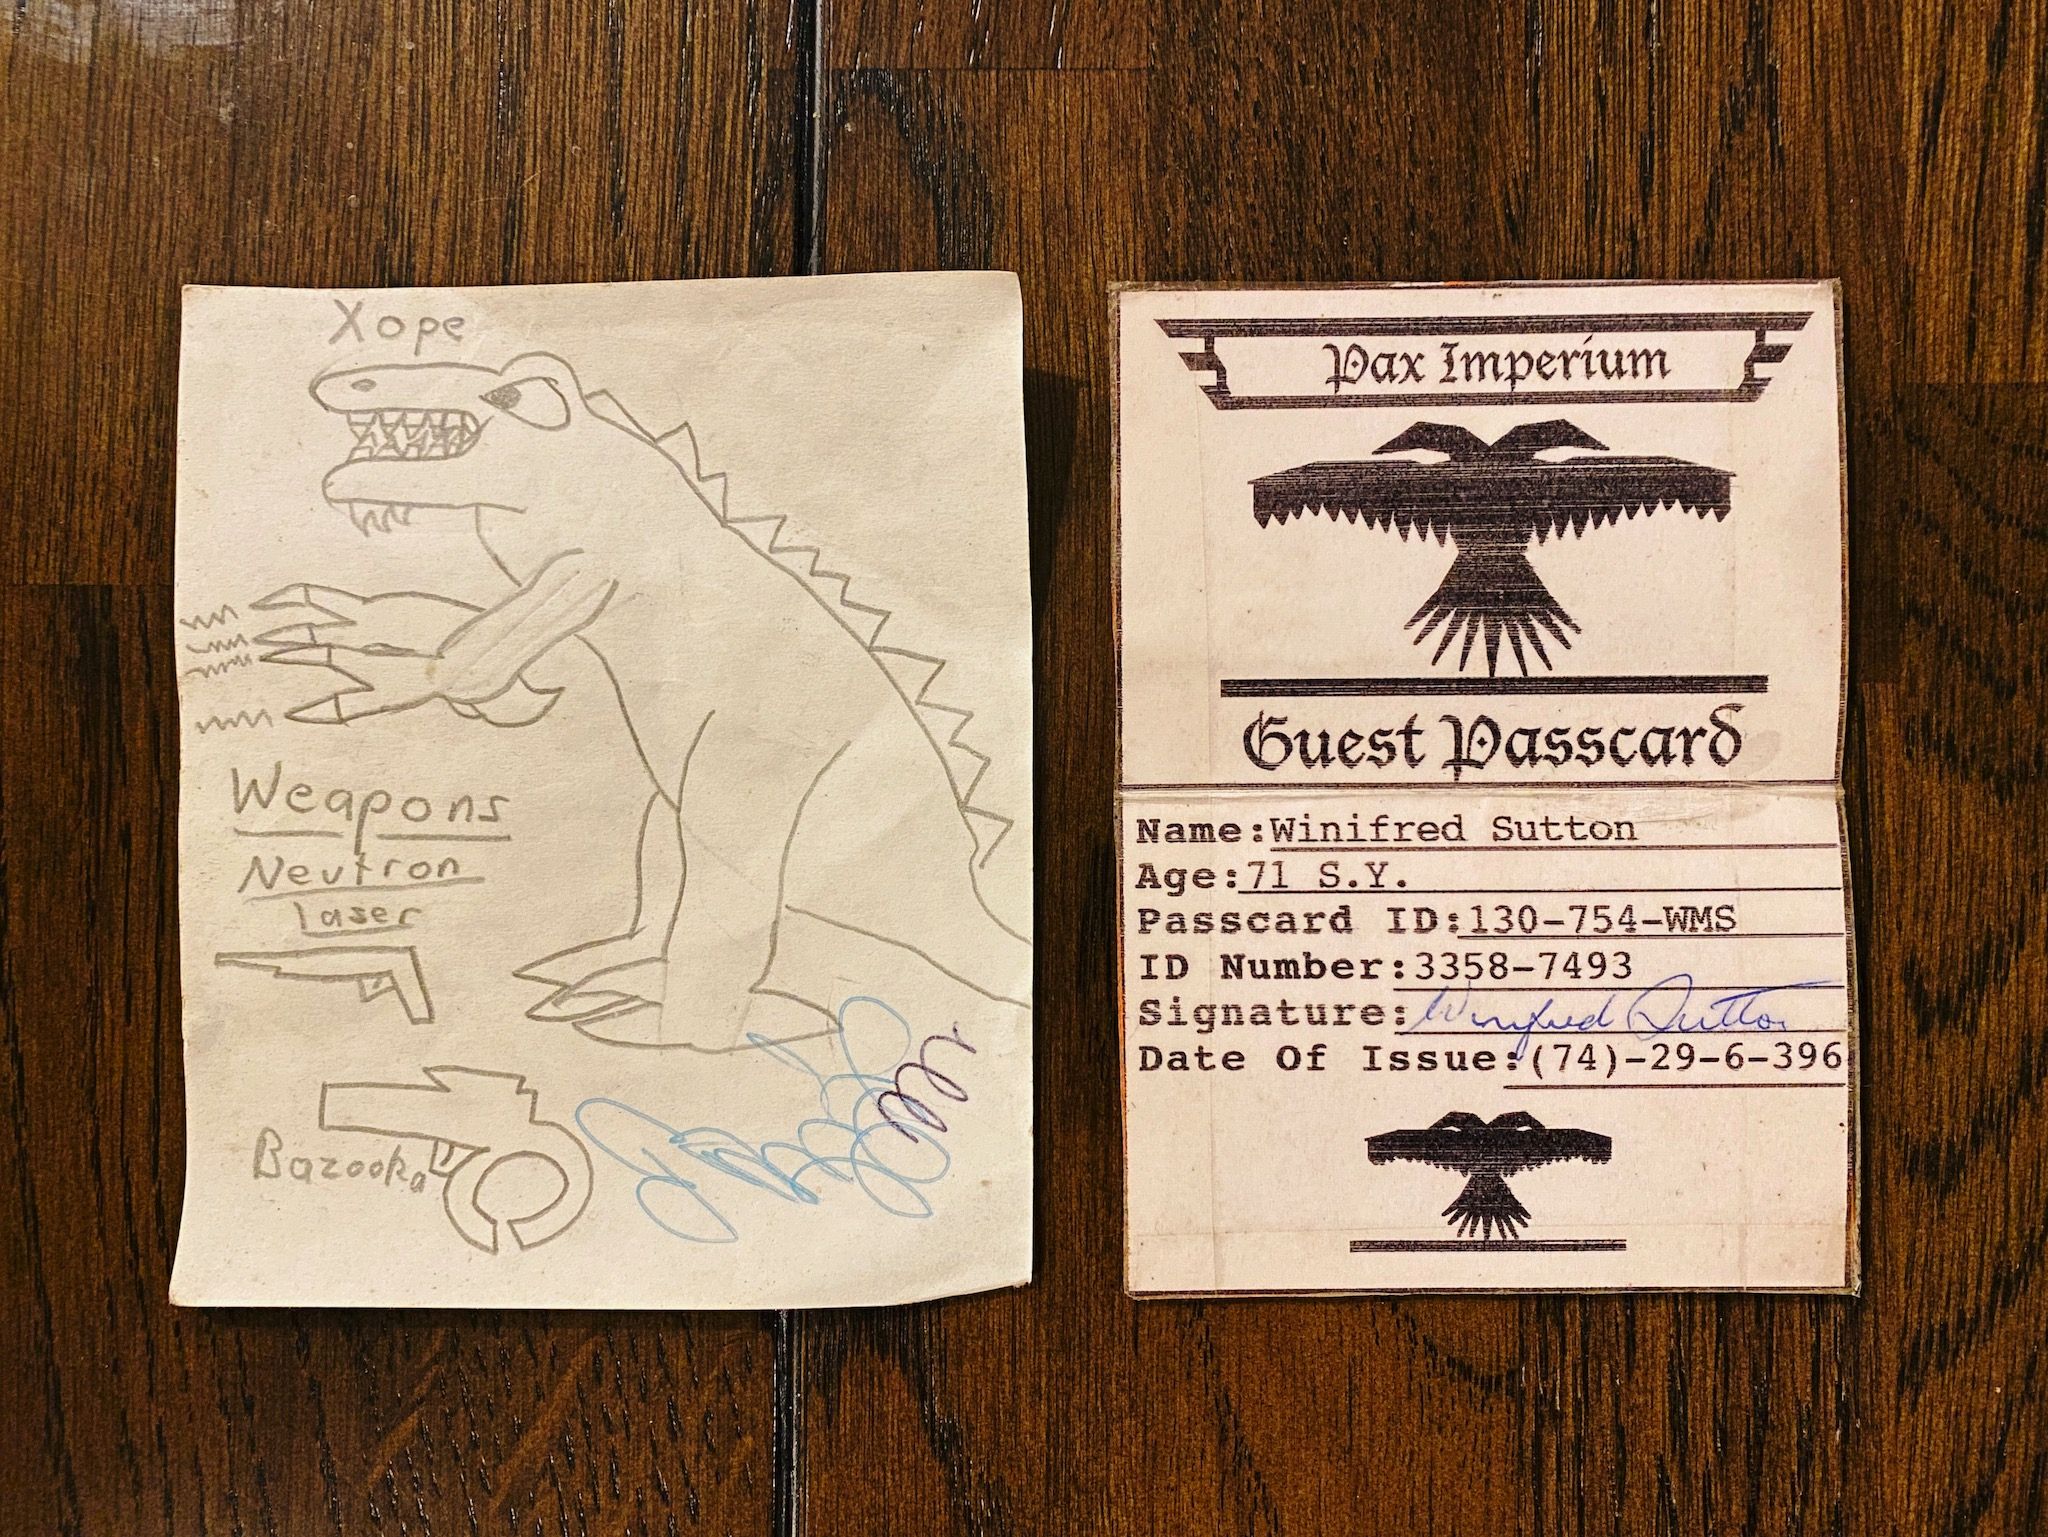 A photo showing two small pieces of paper, the first with a t-rex-type dinosaur on it with lightning coming from its front claws. Its name is "Xope" and it has two weapons, a neutron laser and a bazooka. The second paper is laminated and folds in two and says "Pax Imperium" at the top in a gothic font, with a rip-off of the 40K universe's Imperial double-headed eagle logo, with my grandma's name and age, an "ID Number", her signature, and a "Date of Issue" field that says "(74)-29-6-396".